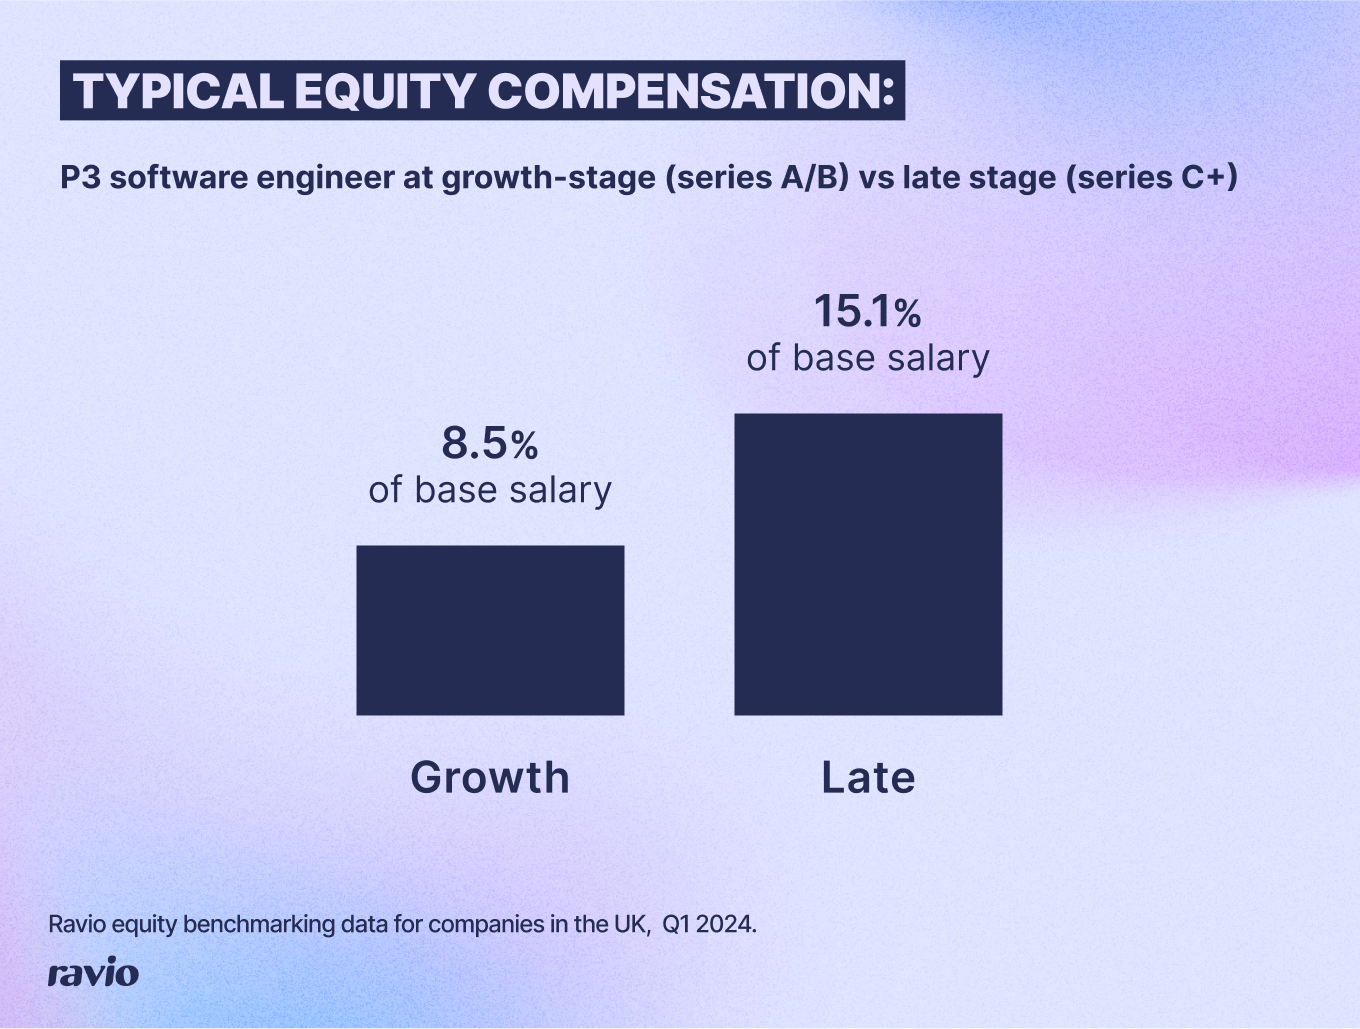 A typical equity offer for a P3 software engineer at a growth stage company is 8.5% of base salary, whereas for company at late stage it is 15.1% of base salary